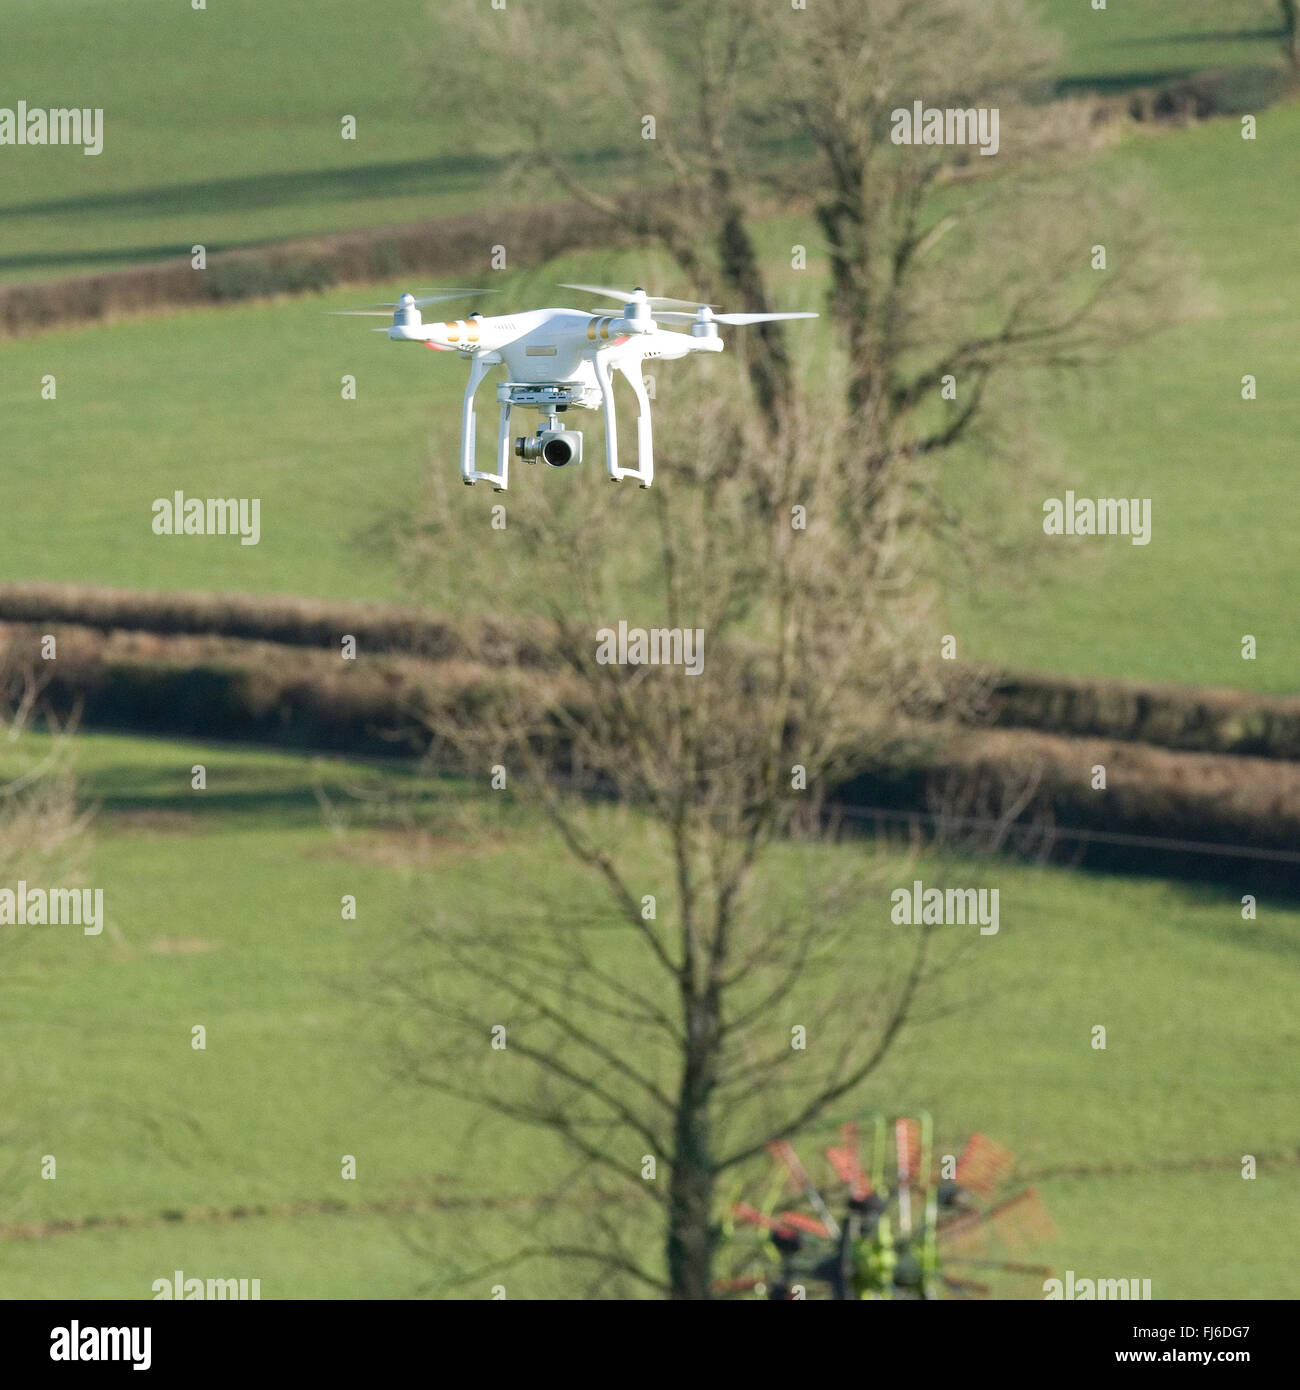 drone flying on private land Stock Photo